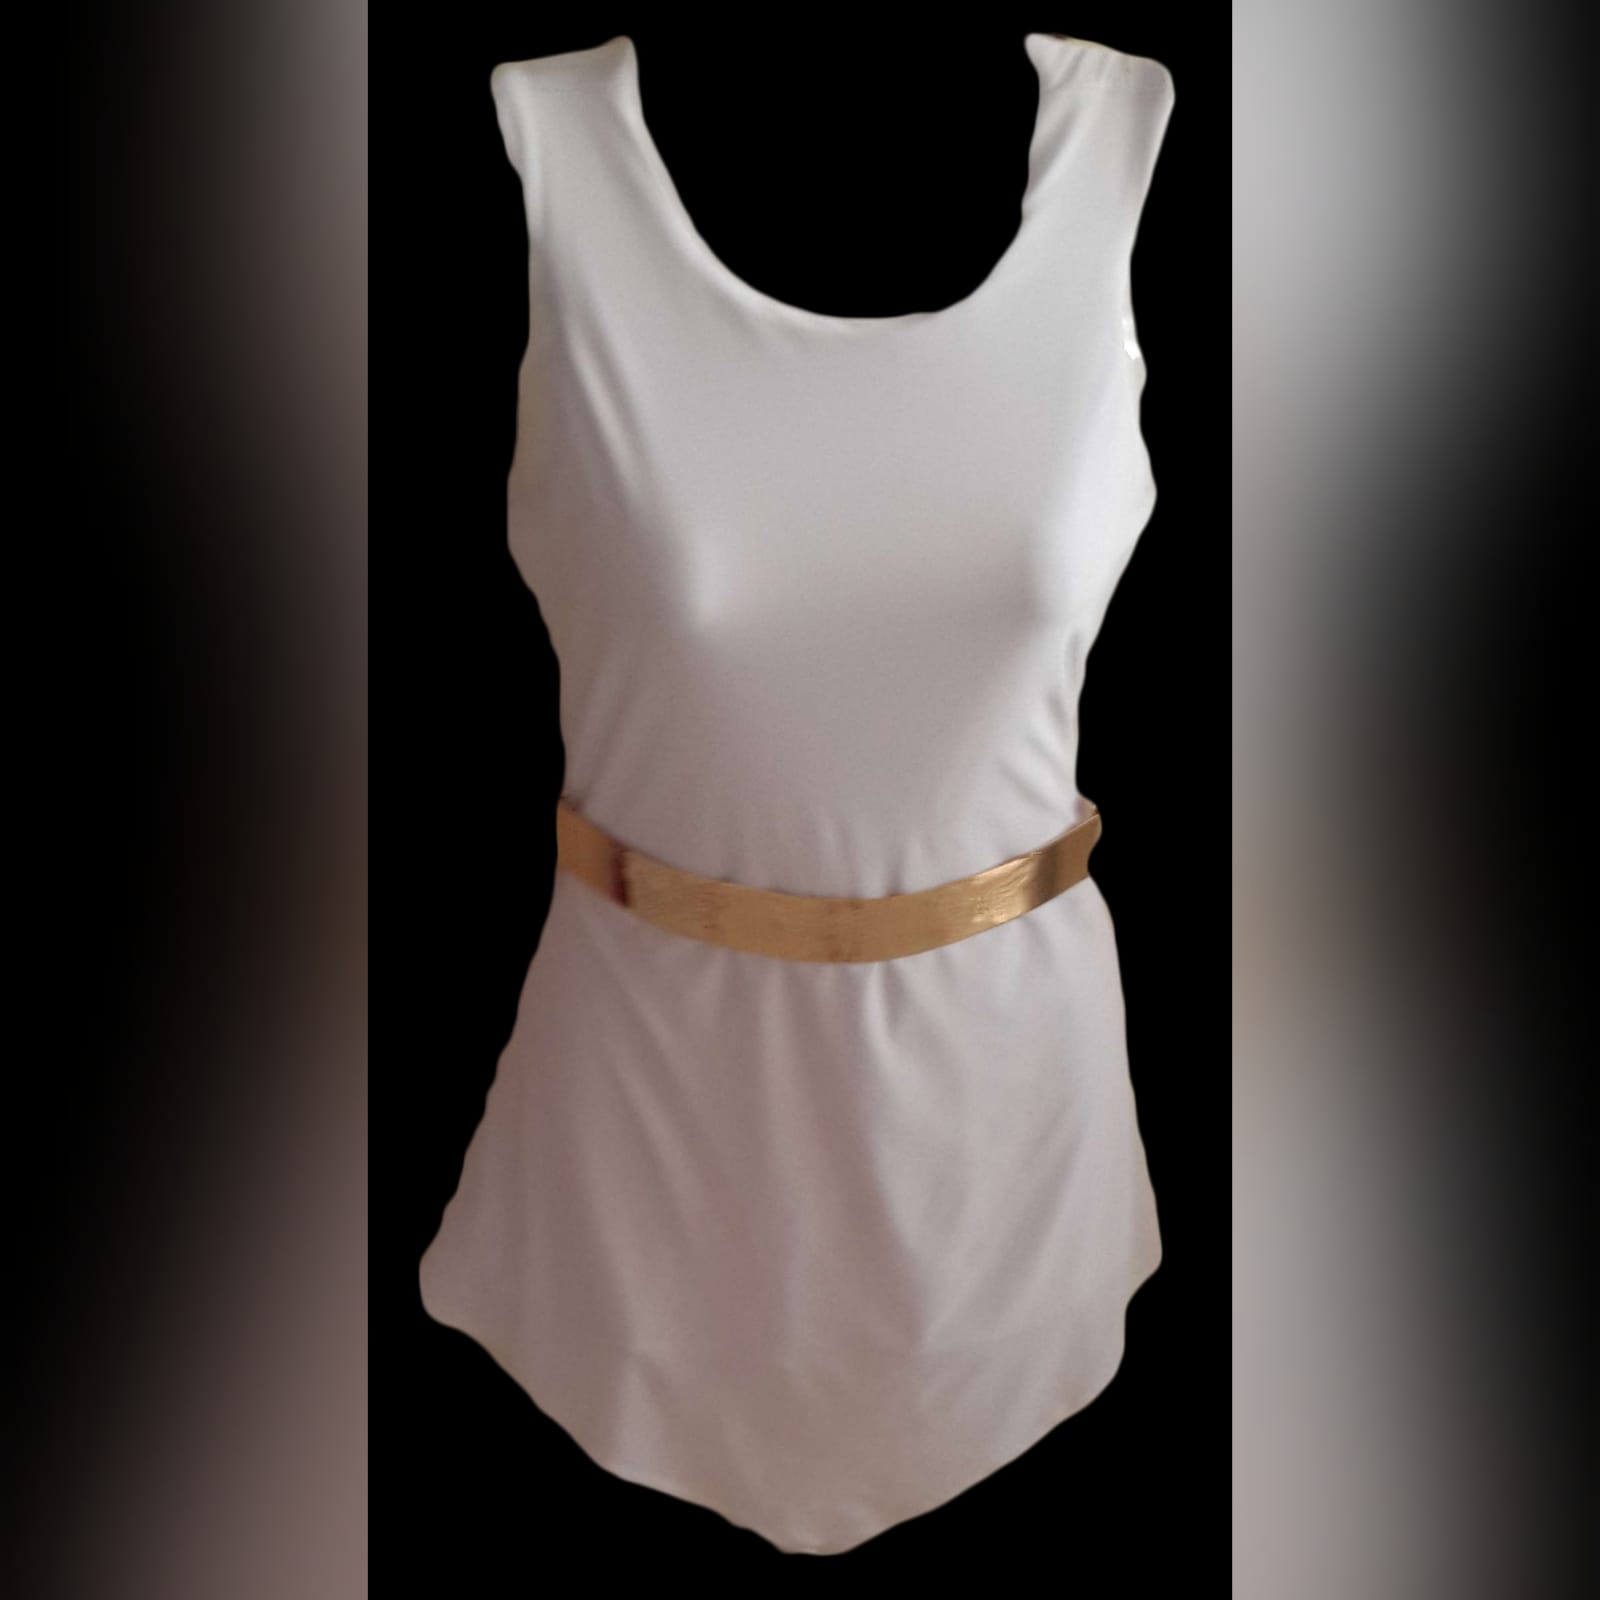 White short smart casual bodysuit 5 white short smart casual bodysuit creating an illusion of a short dress in front, with low back opening. Client appeared in the local newspaper with talk about her outfit